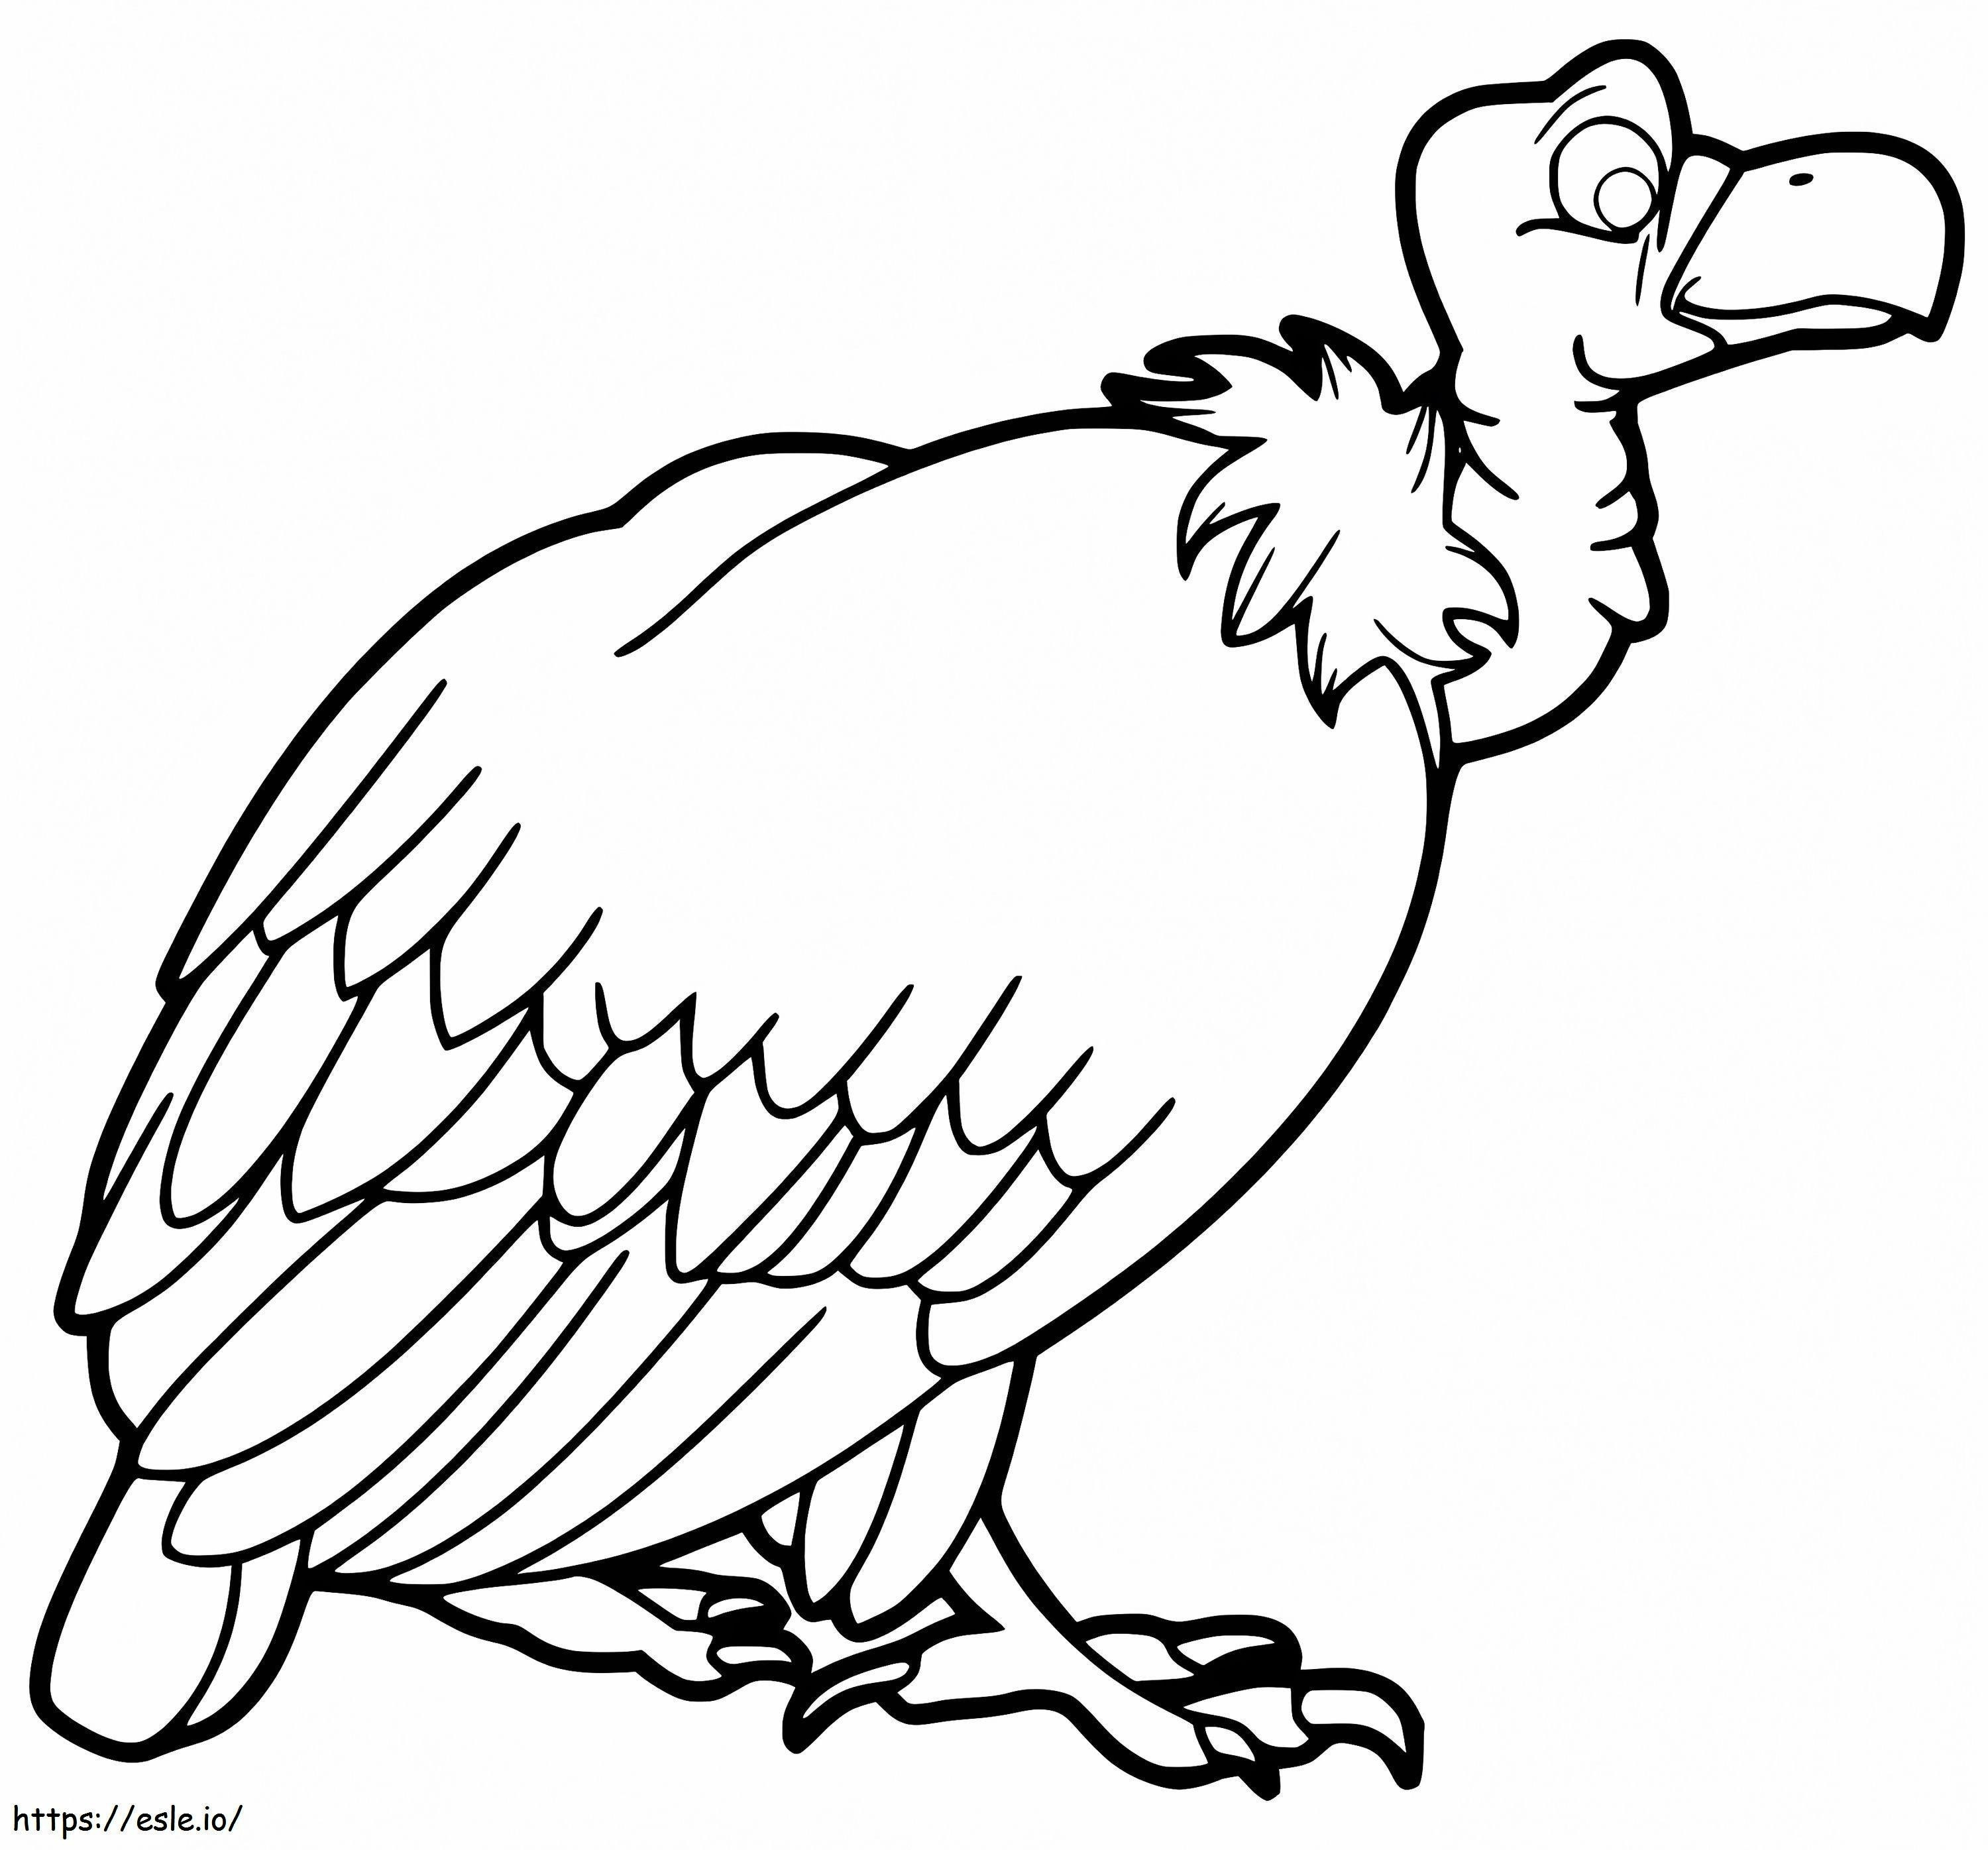 Vulture Printable coloring page